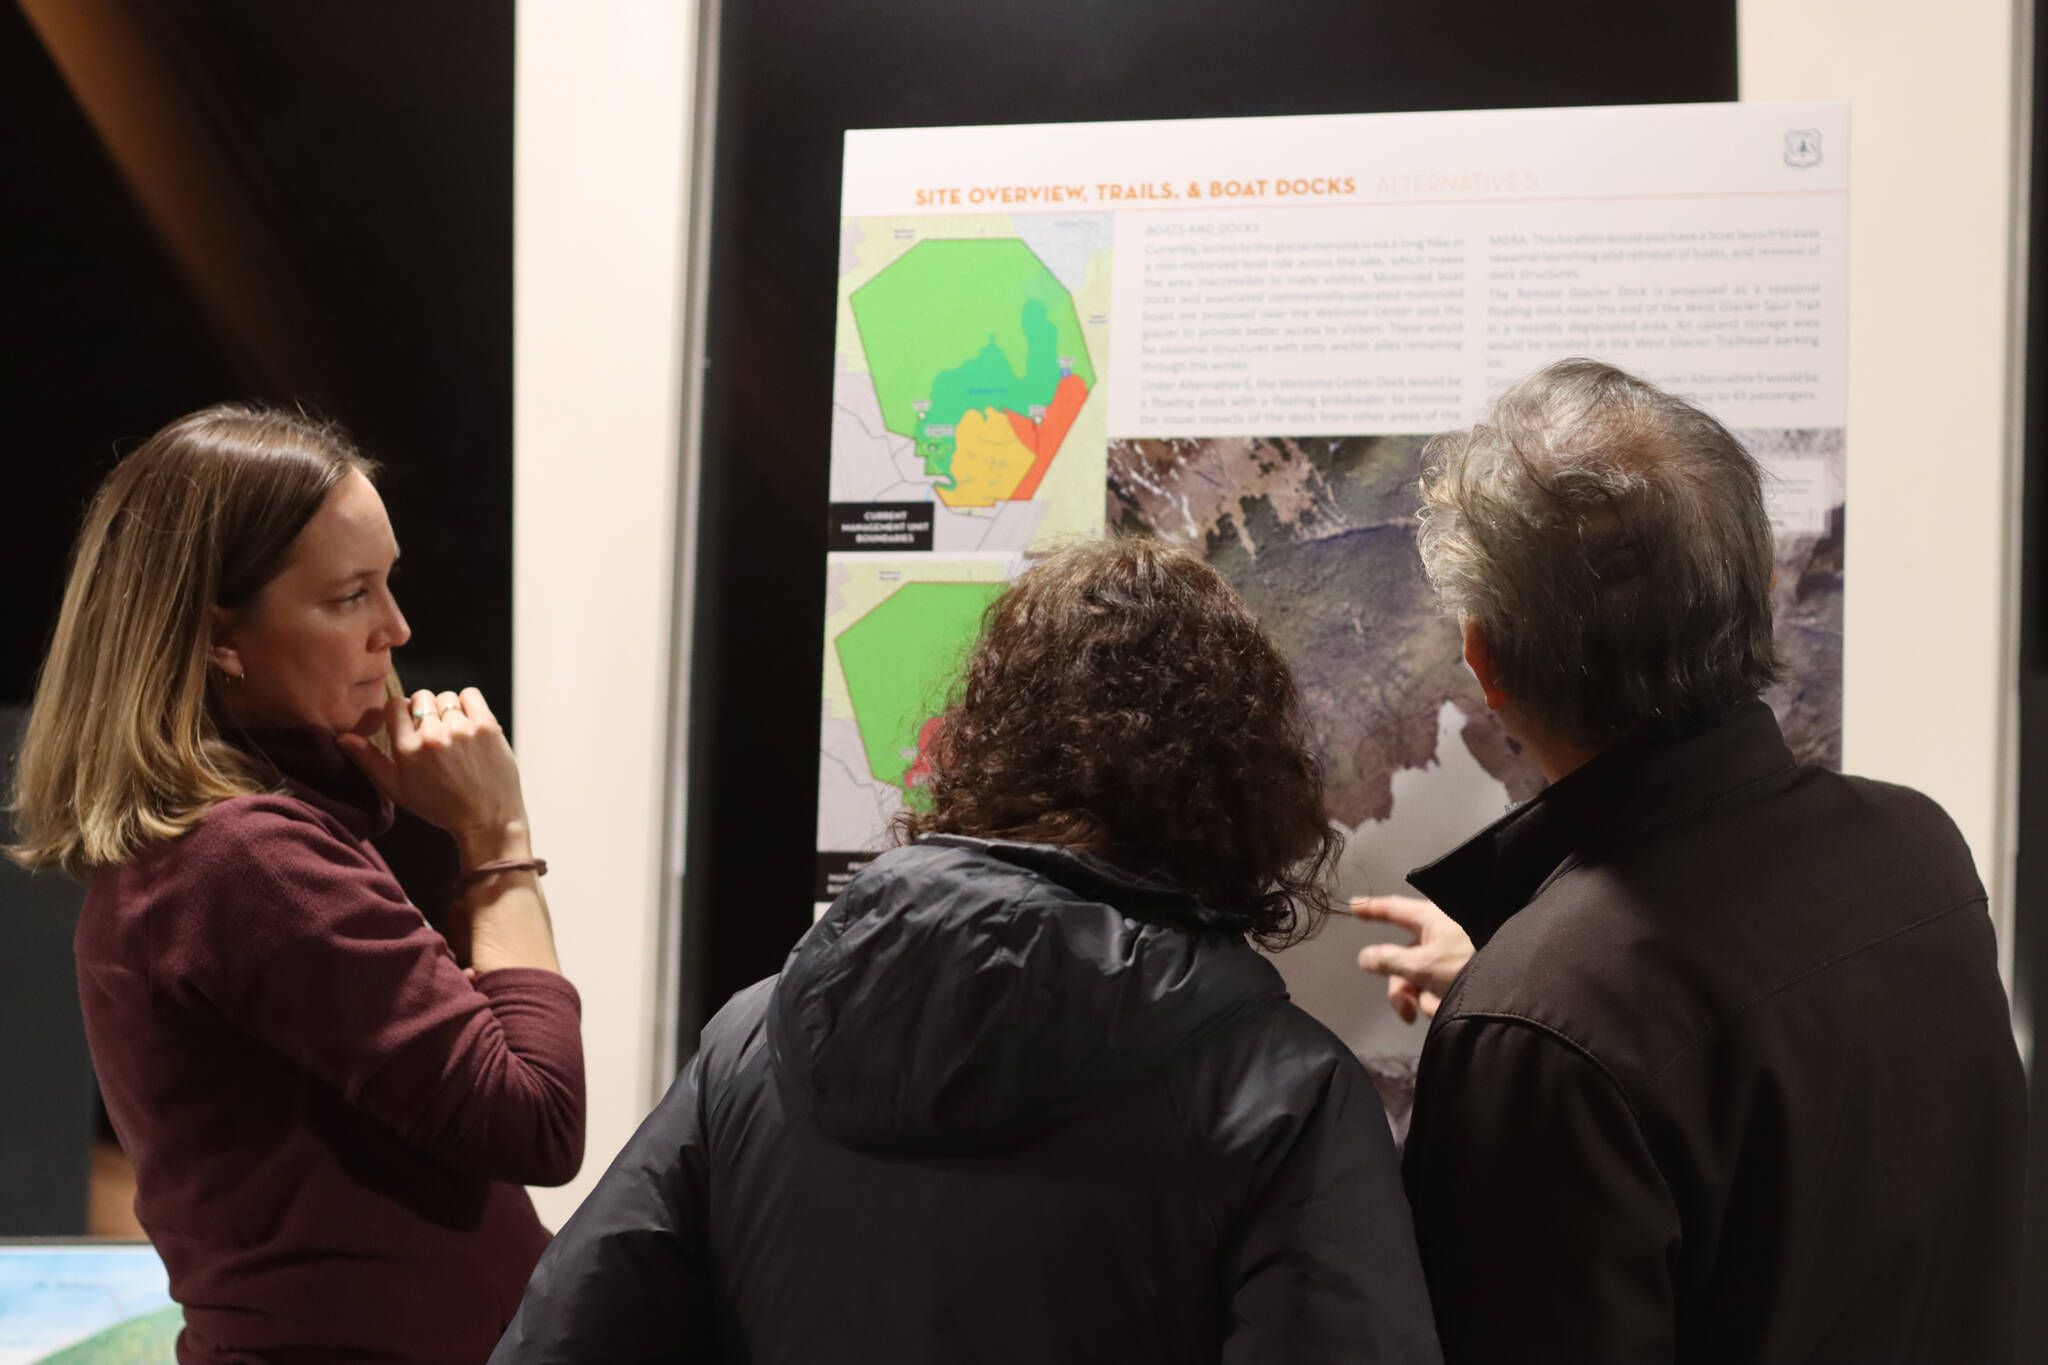 Carrie Connaker with Solstice Alaska Consulting meets with Juneau residents during an open house at the Mendenhall Glacier Visitor Center on Tuesday to help explain alternatives currently being proposed for the recreation area. (Jonson Kuhn / Juneau Empire)